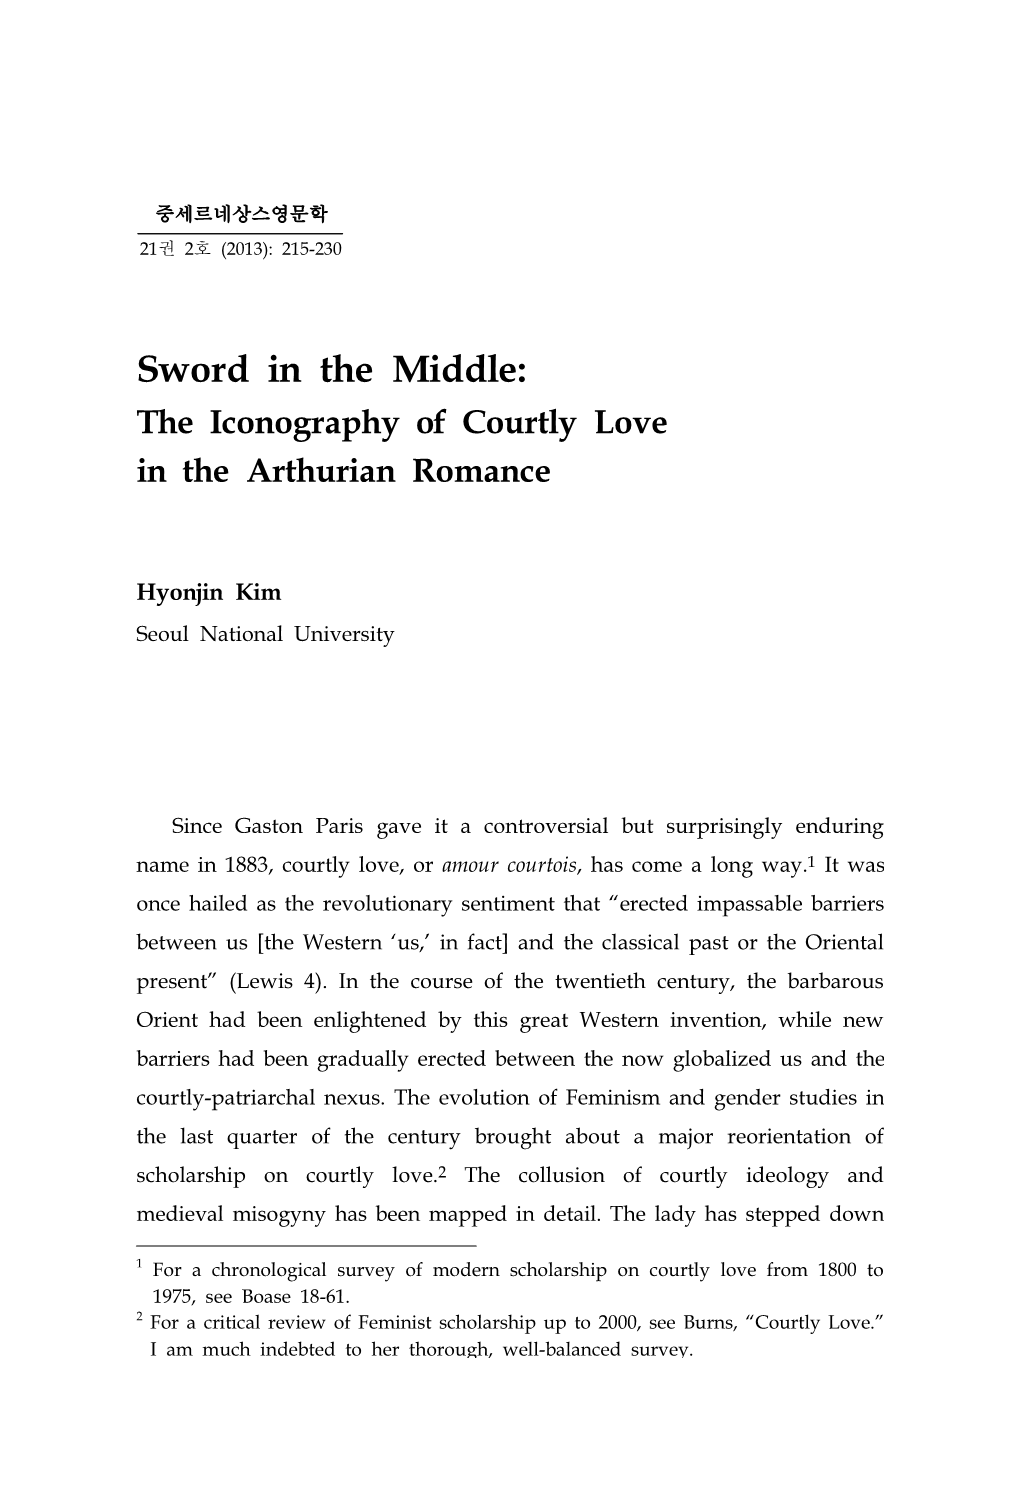 Sword in the Middle: the Iconography of Courtly Love in the Arthurian Romance